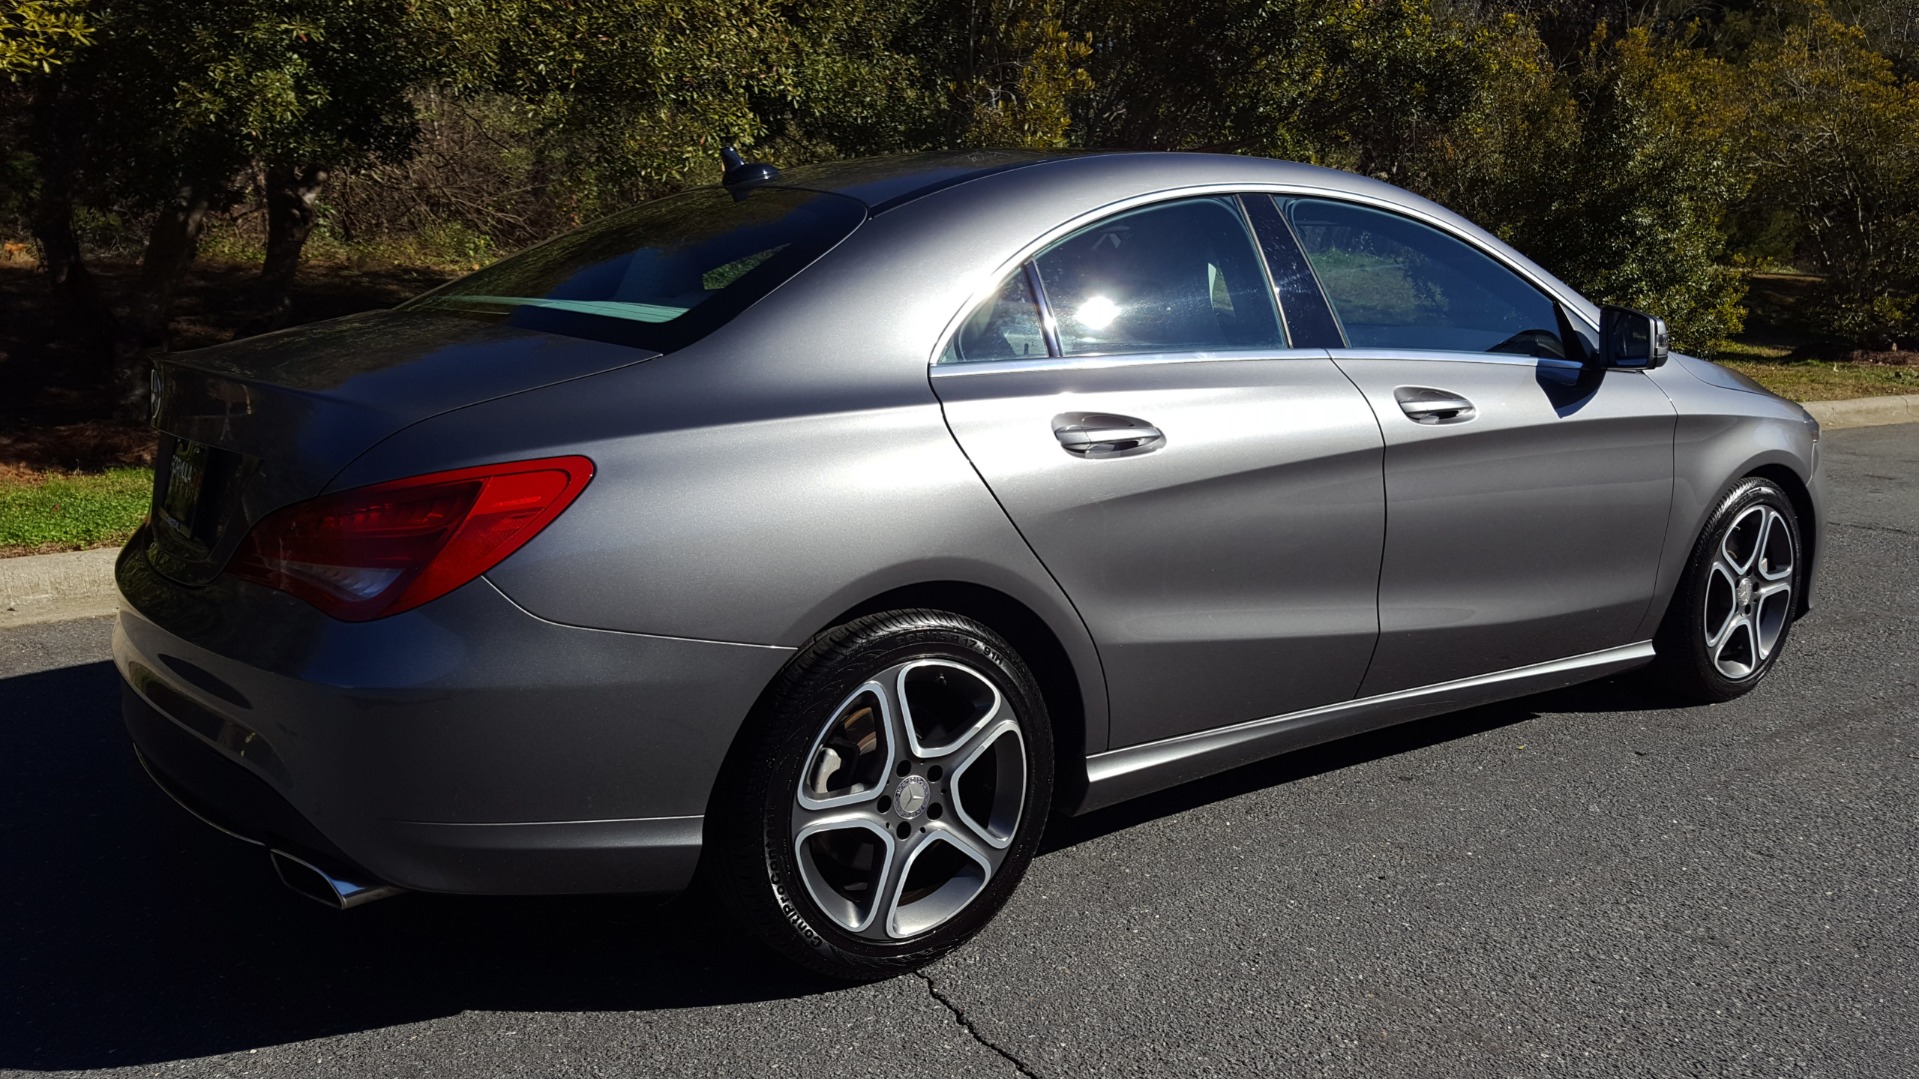 Used 2014 Mercedes-Benz CLA-CLASS CLA 250 / NAV / PANO-ROOF / BLIND SPOT ASSIST / XENON HEADLIGHTS for sale Sold at Formula Imports in Charlotte NC 28227 8